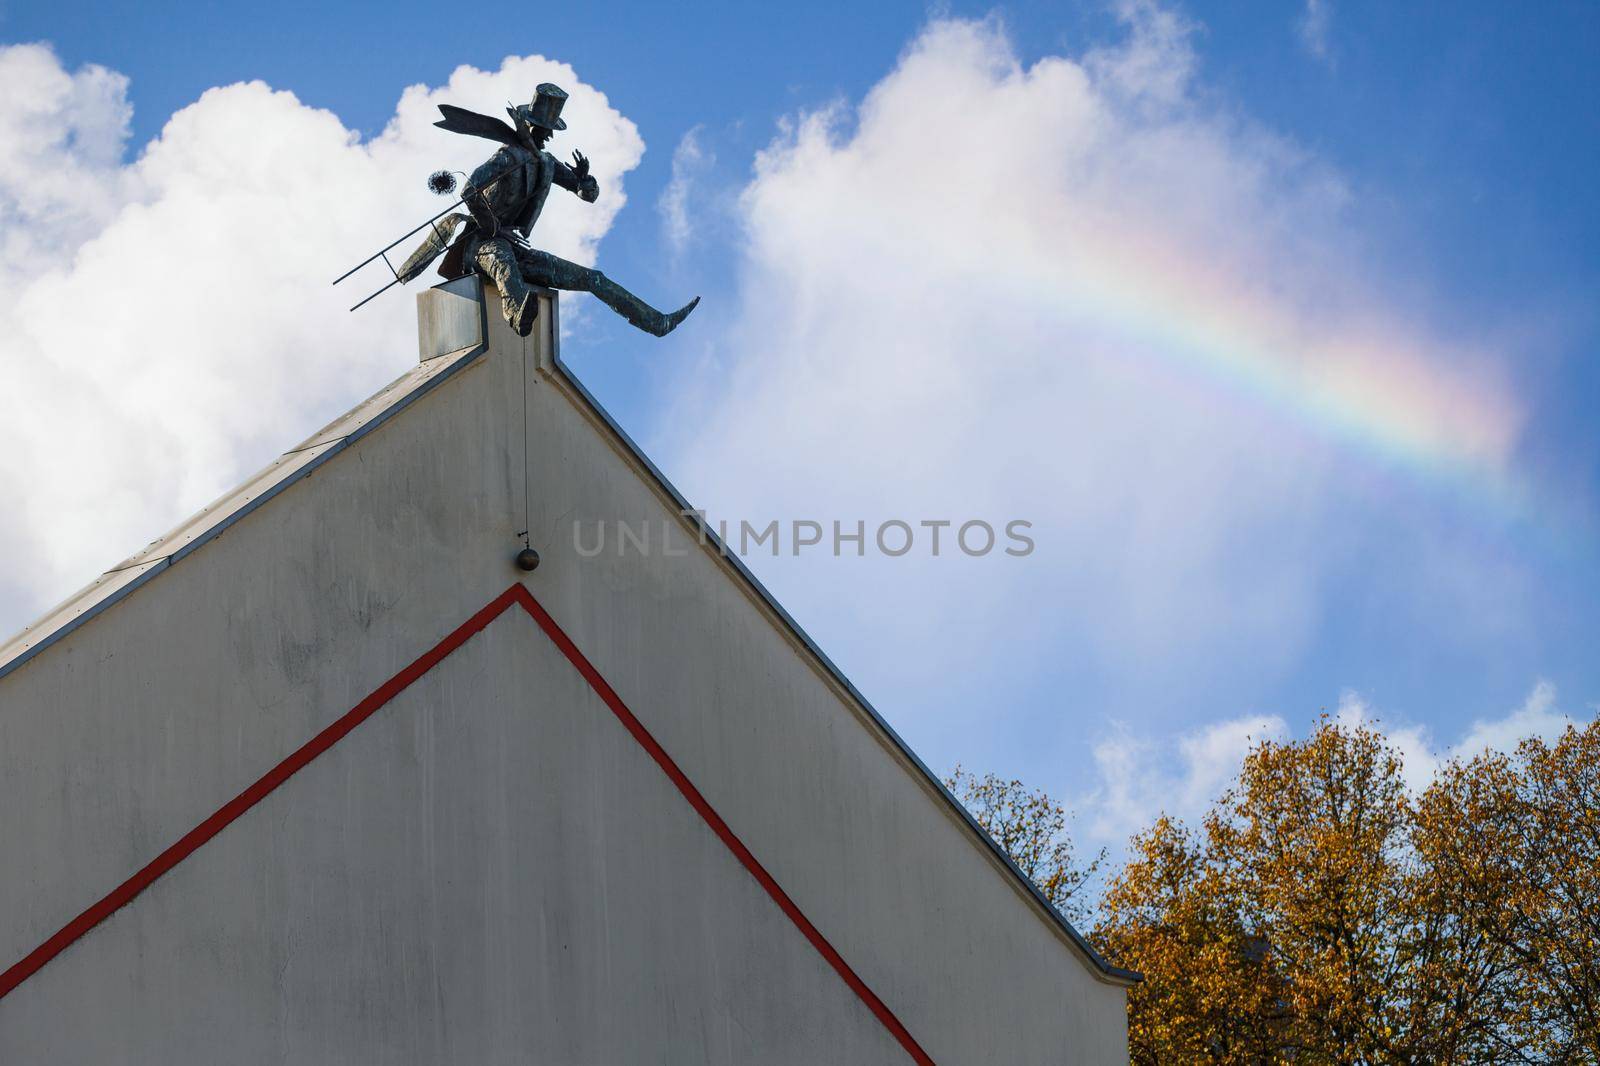 Chimney Sweeper Sculpture on roof in old town of Klaipeda, Lithuania. House wall in Klaipeda Old Town. Blue sky with white clouds and rainbow.